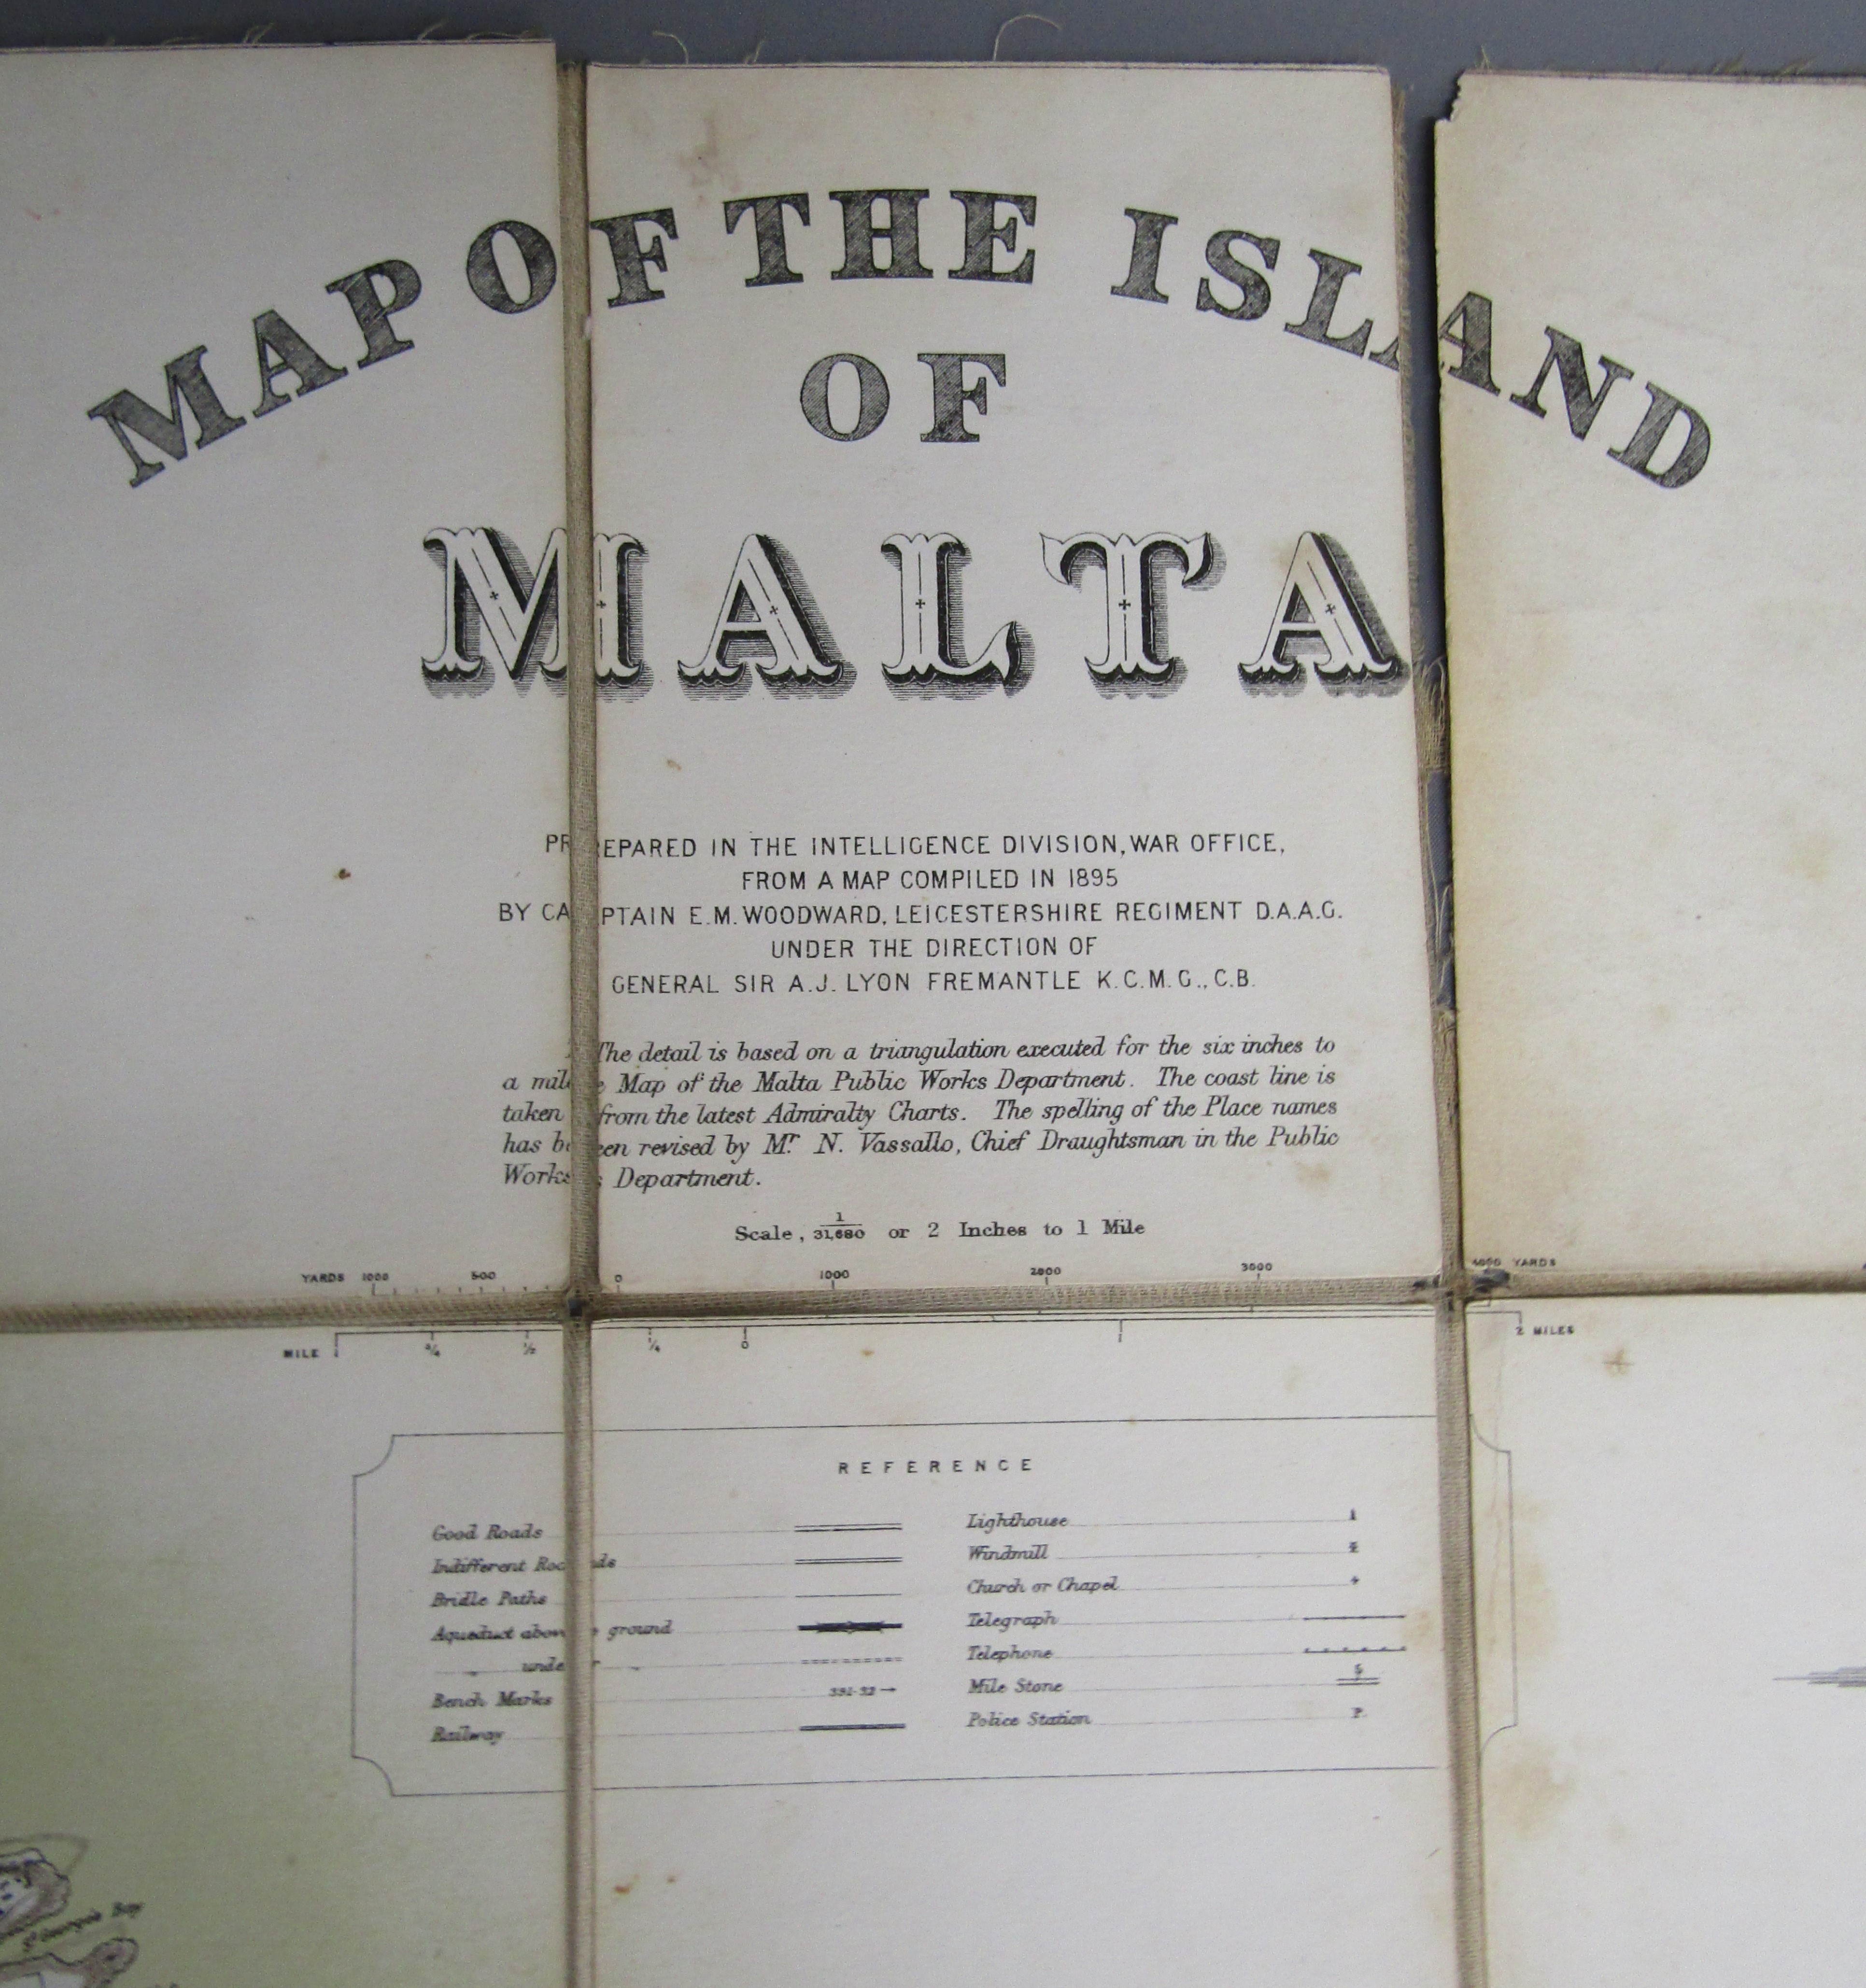 Map of the island of Malta prepared in the intelligence division, War Office from a map compiled - Image 3 of 5